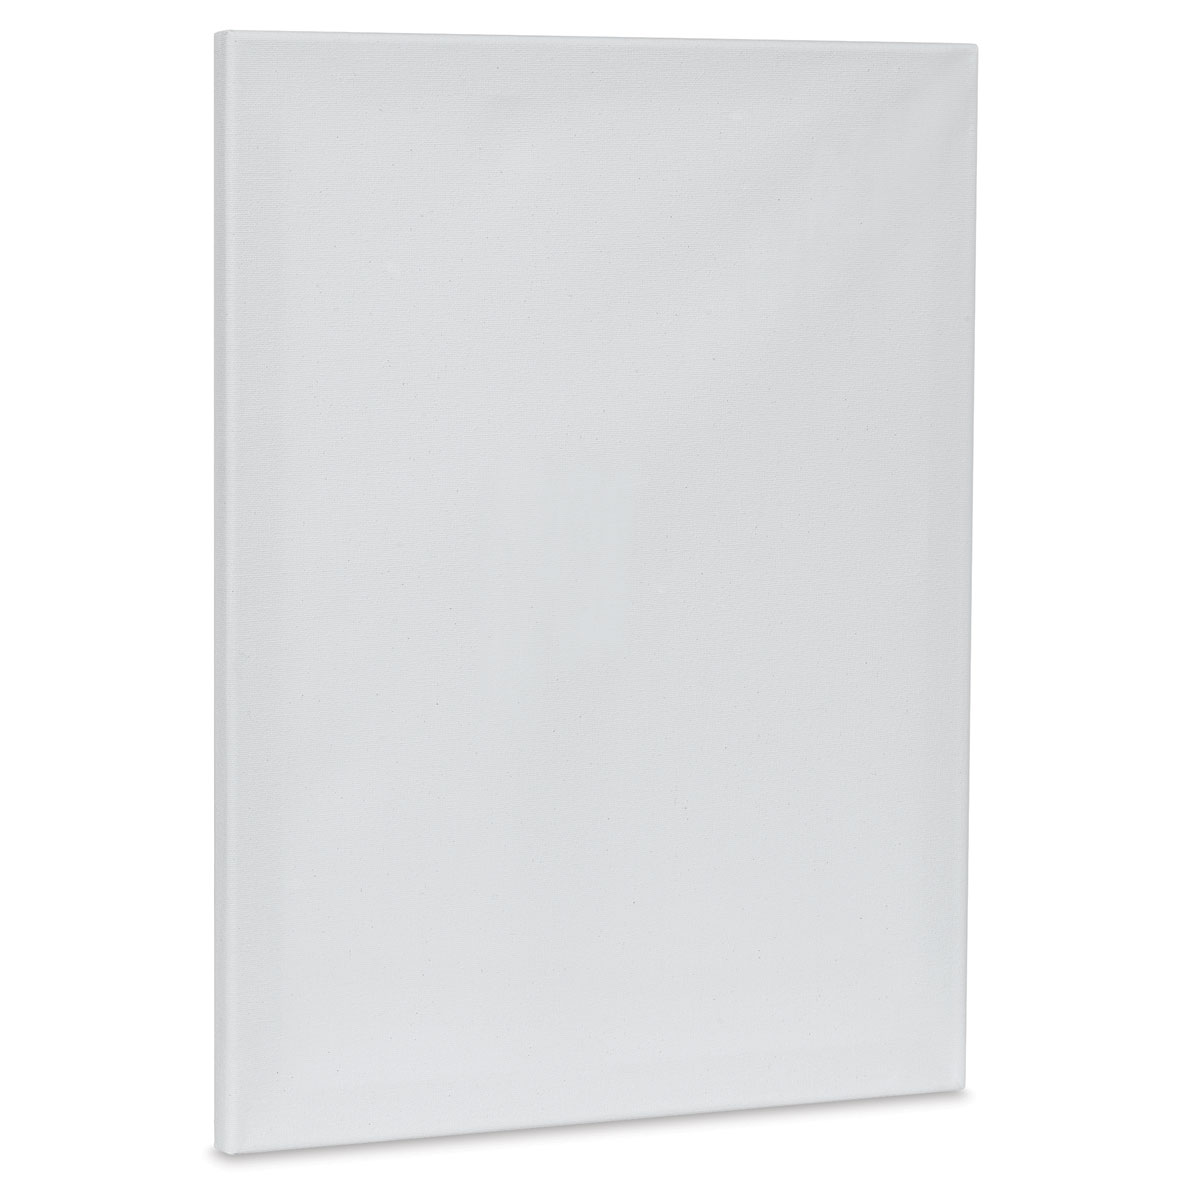 Art Supplies Canvas Wholesale Wood Blank Fine Artist Canvases for